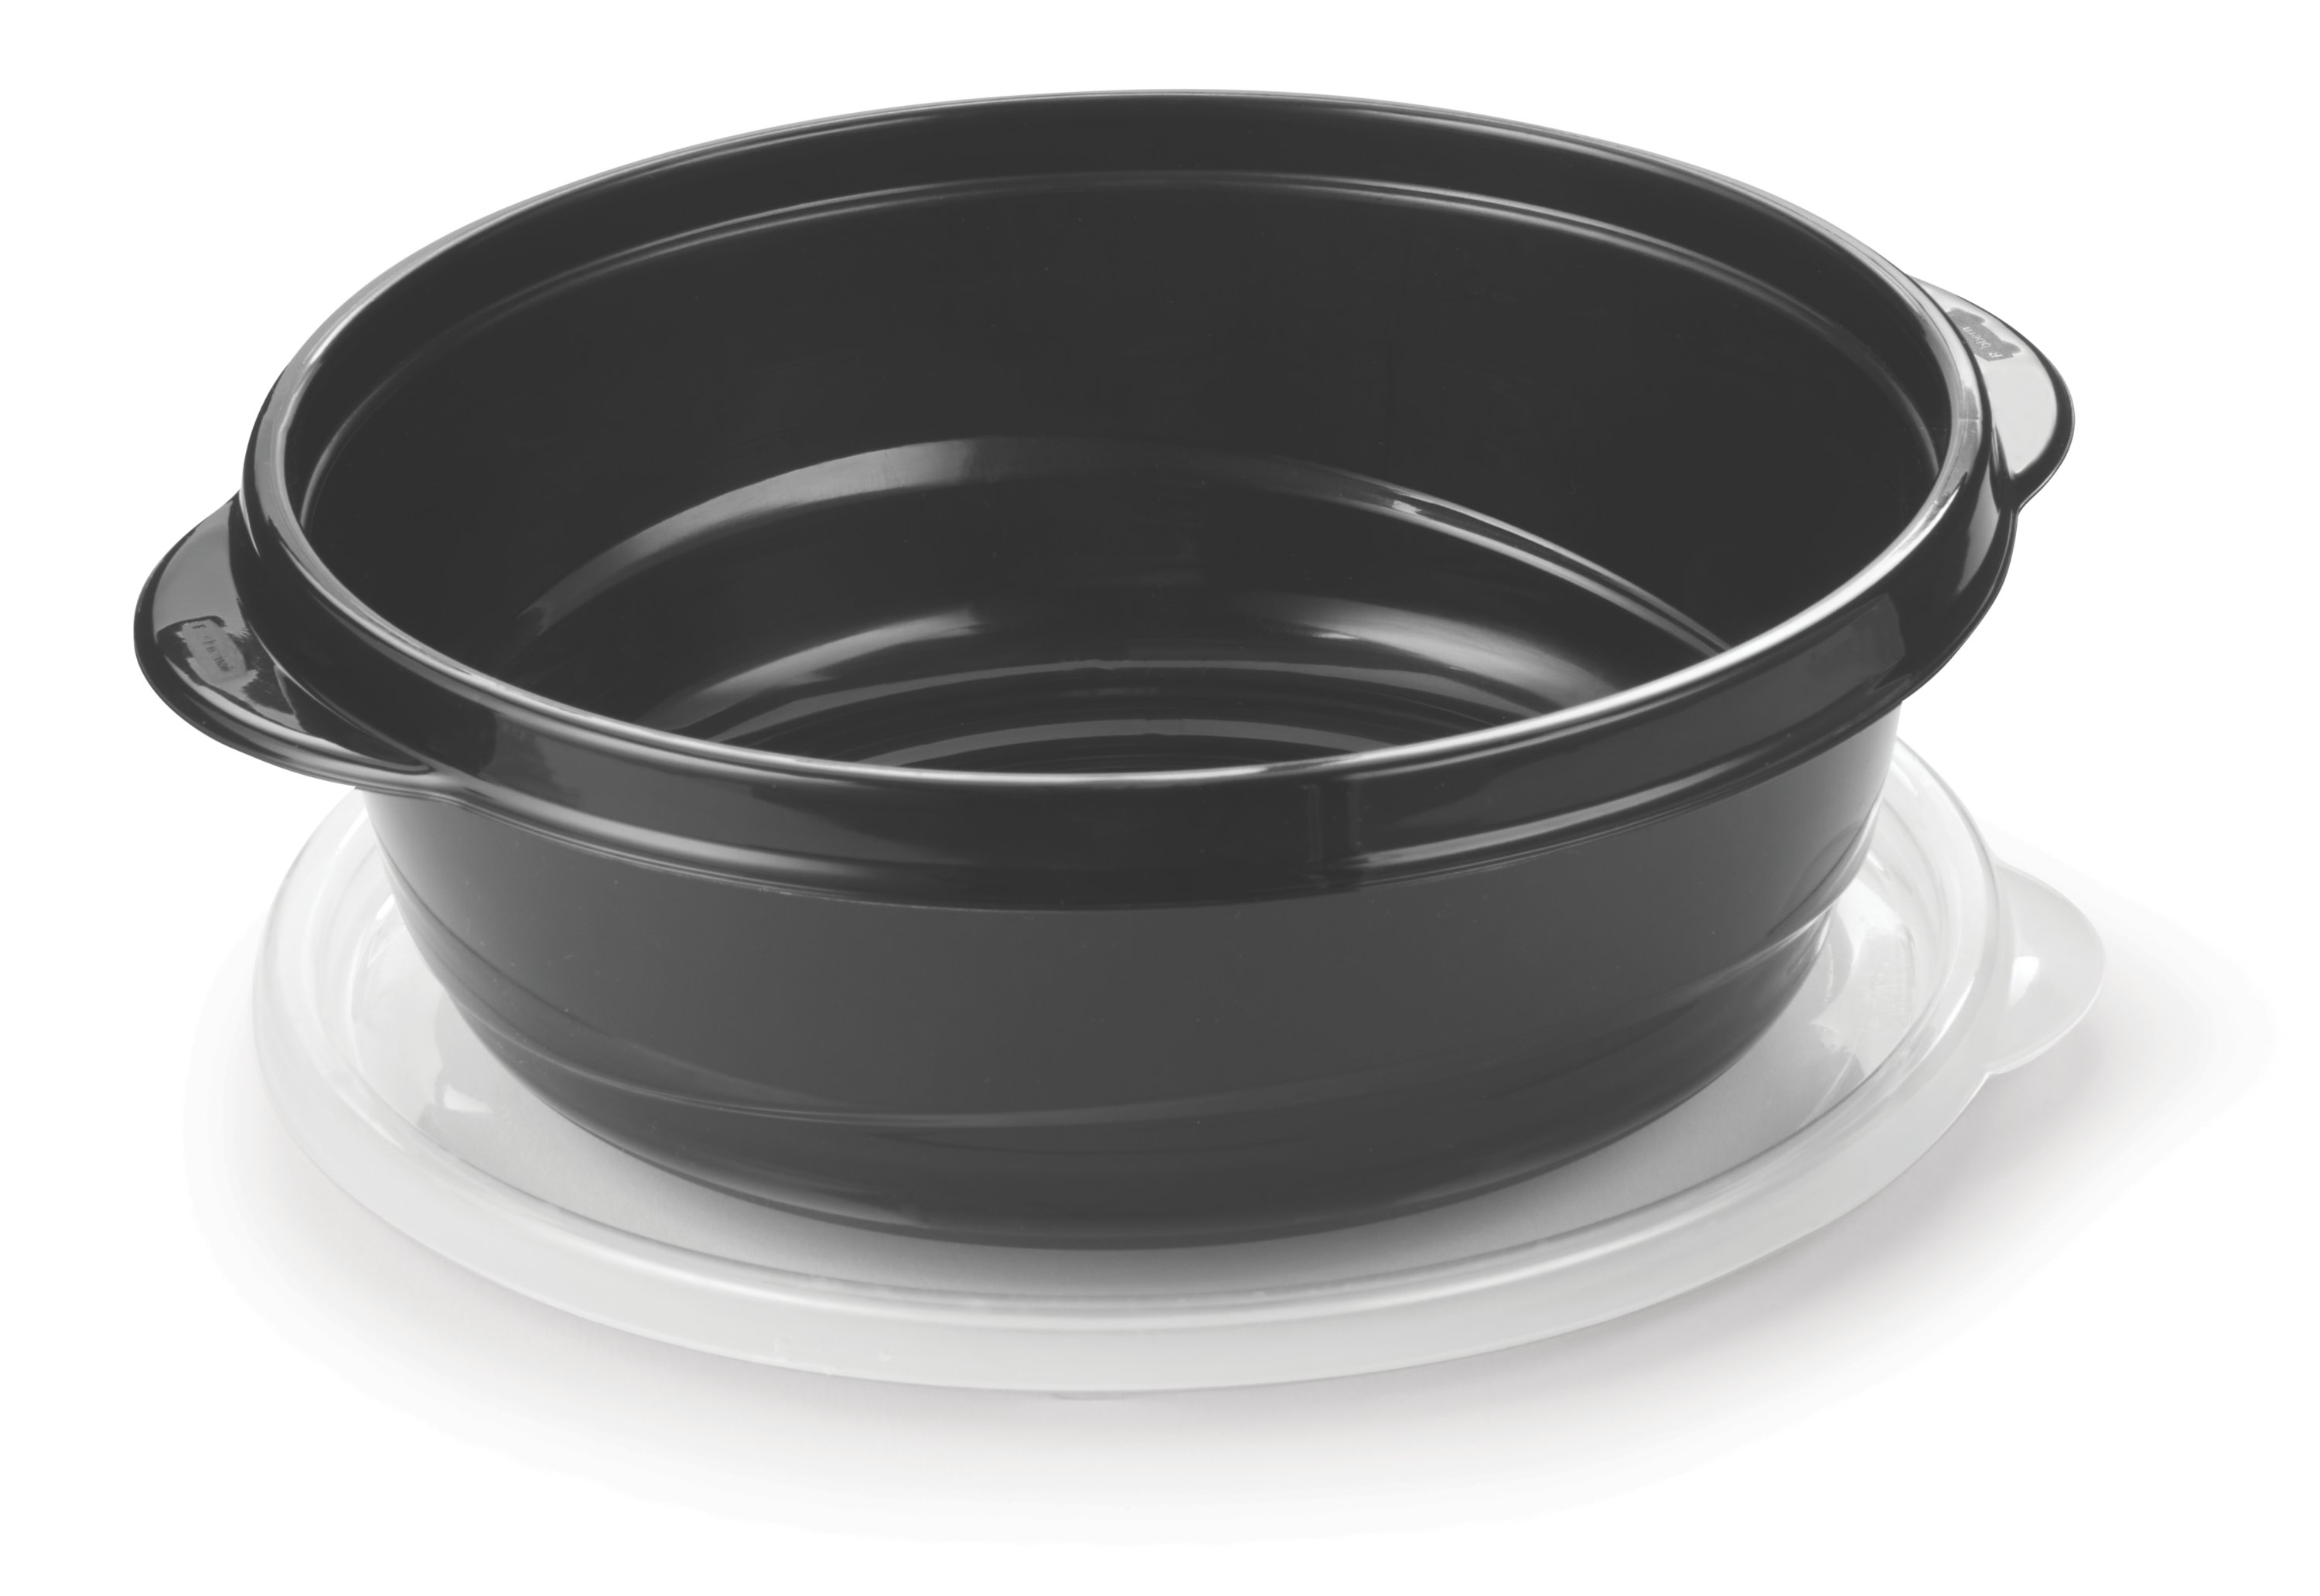 Rubbermaid Food Storage Containers - 5 Pack - Black, 2.35 c - Baker's